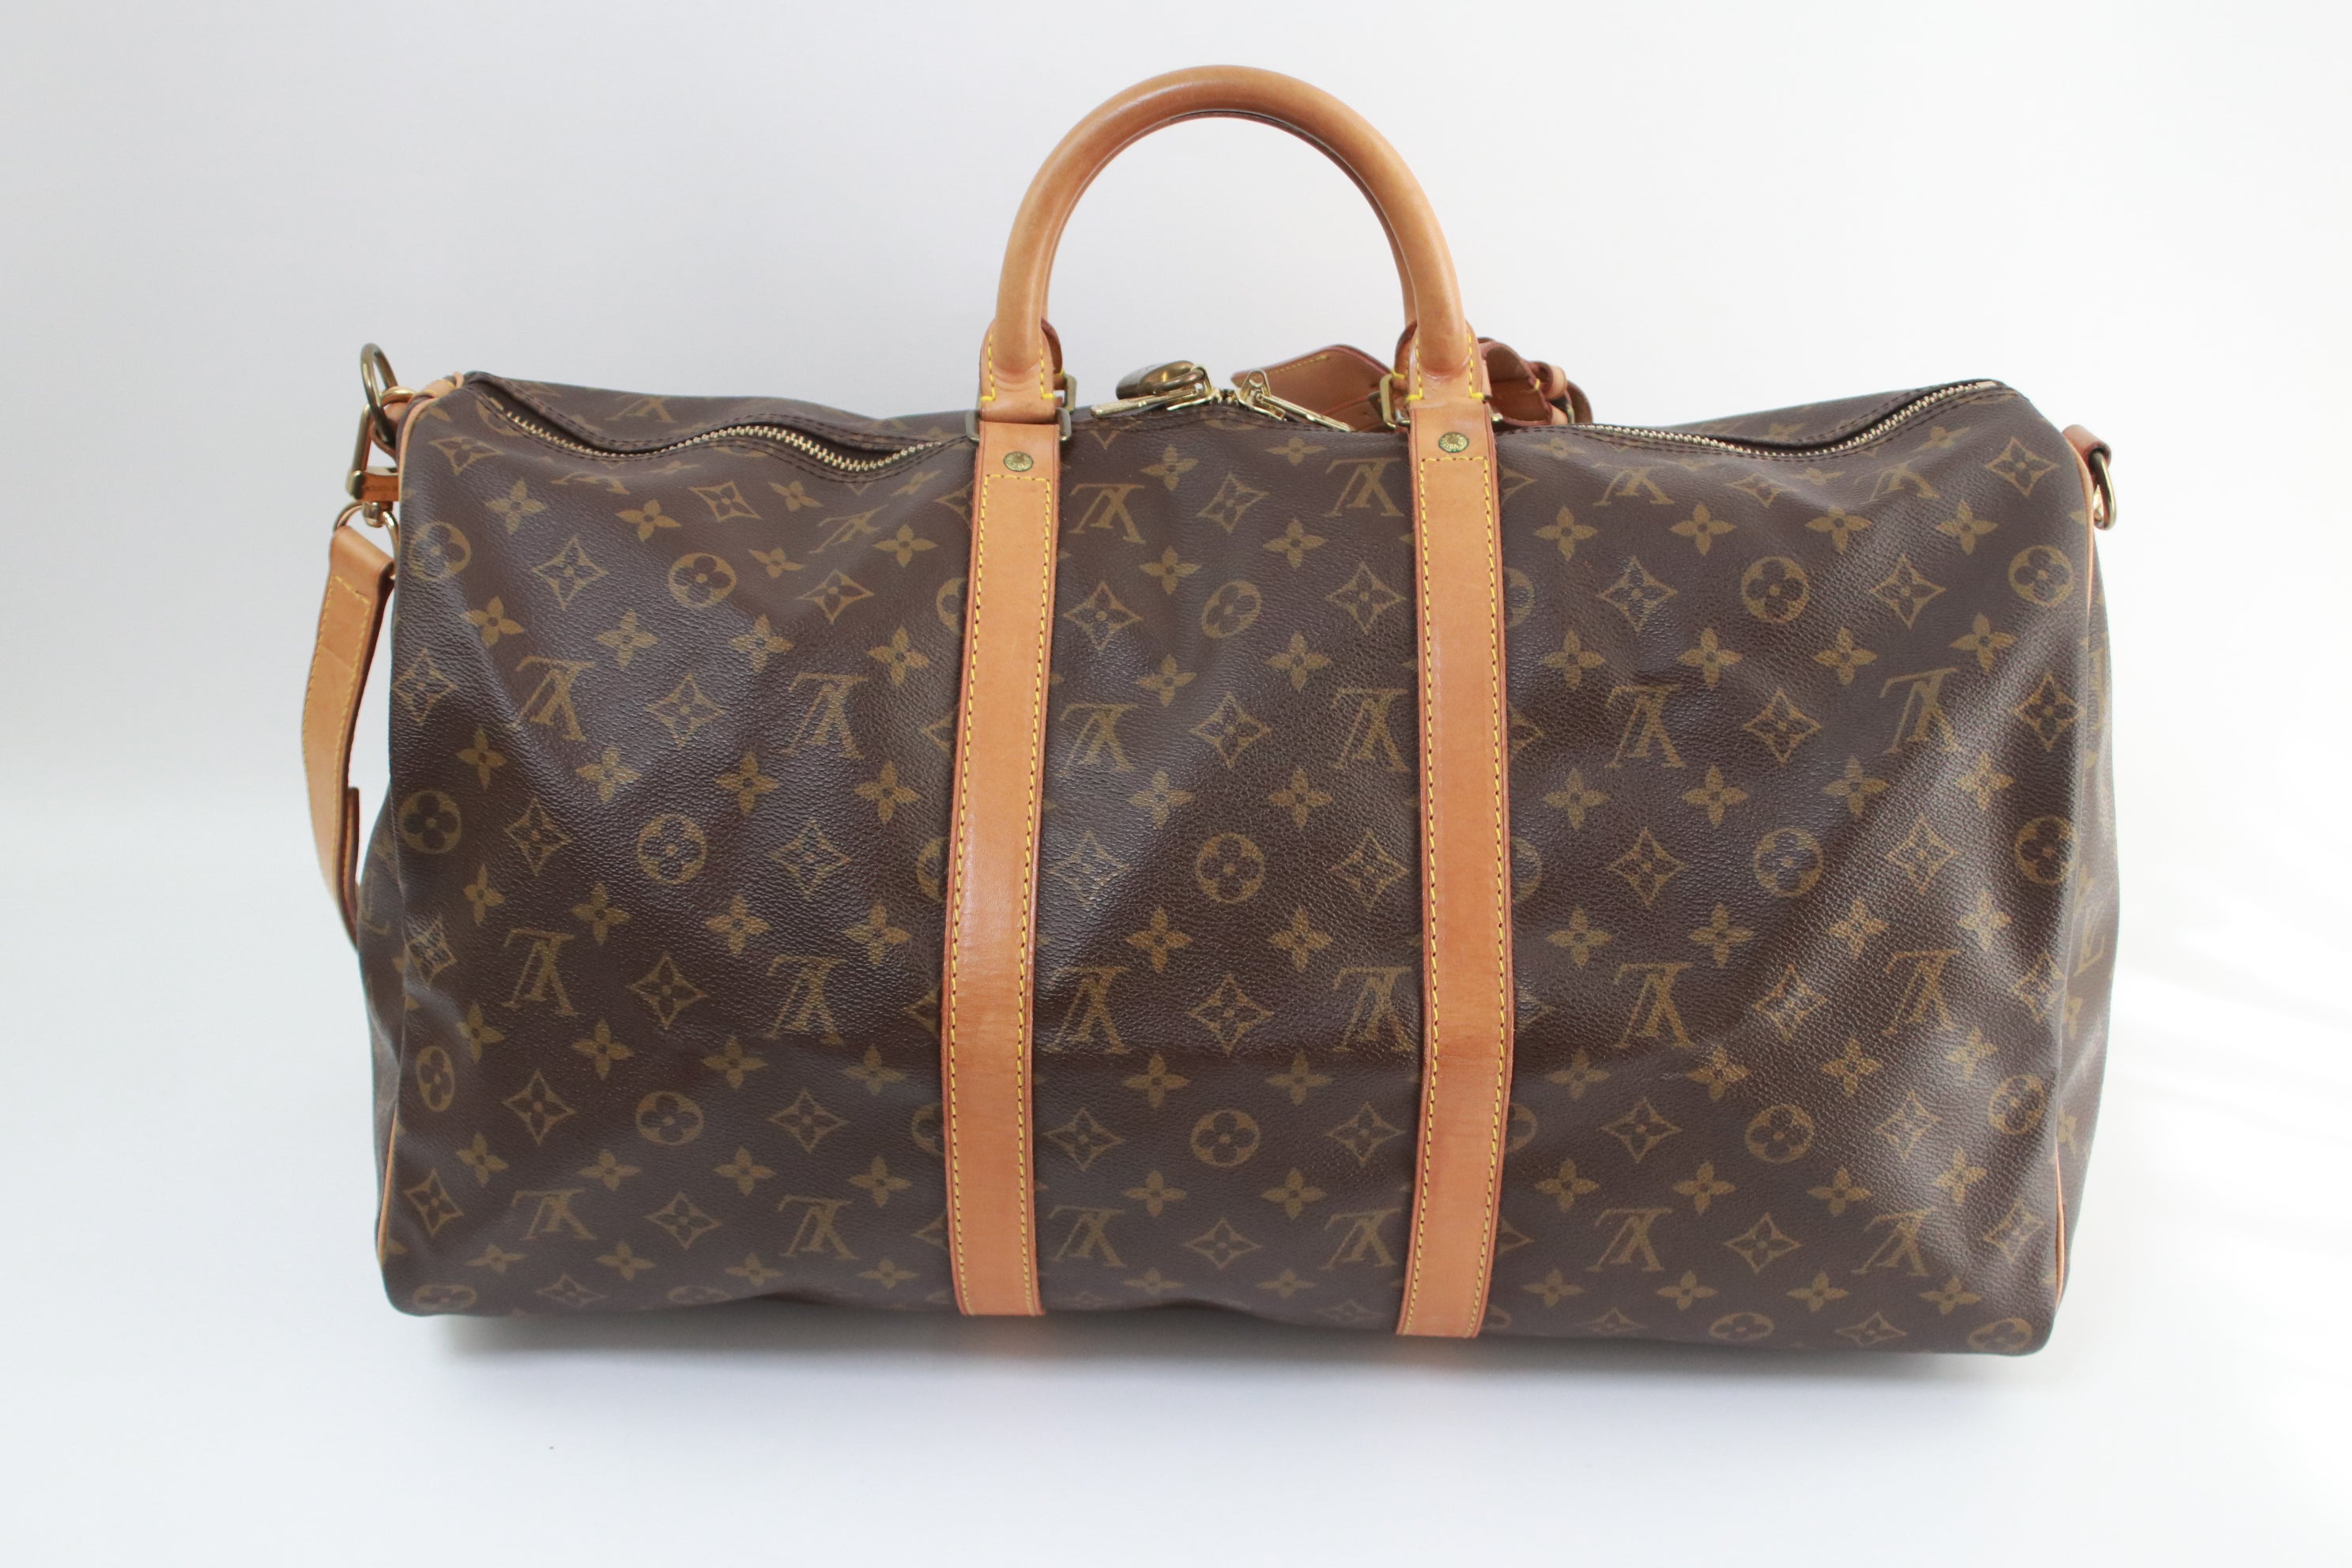 Louis Vuitton pre-owned Keepall 50 Bandouliere Holdall Bag - Farfetch